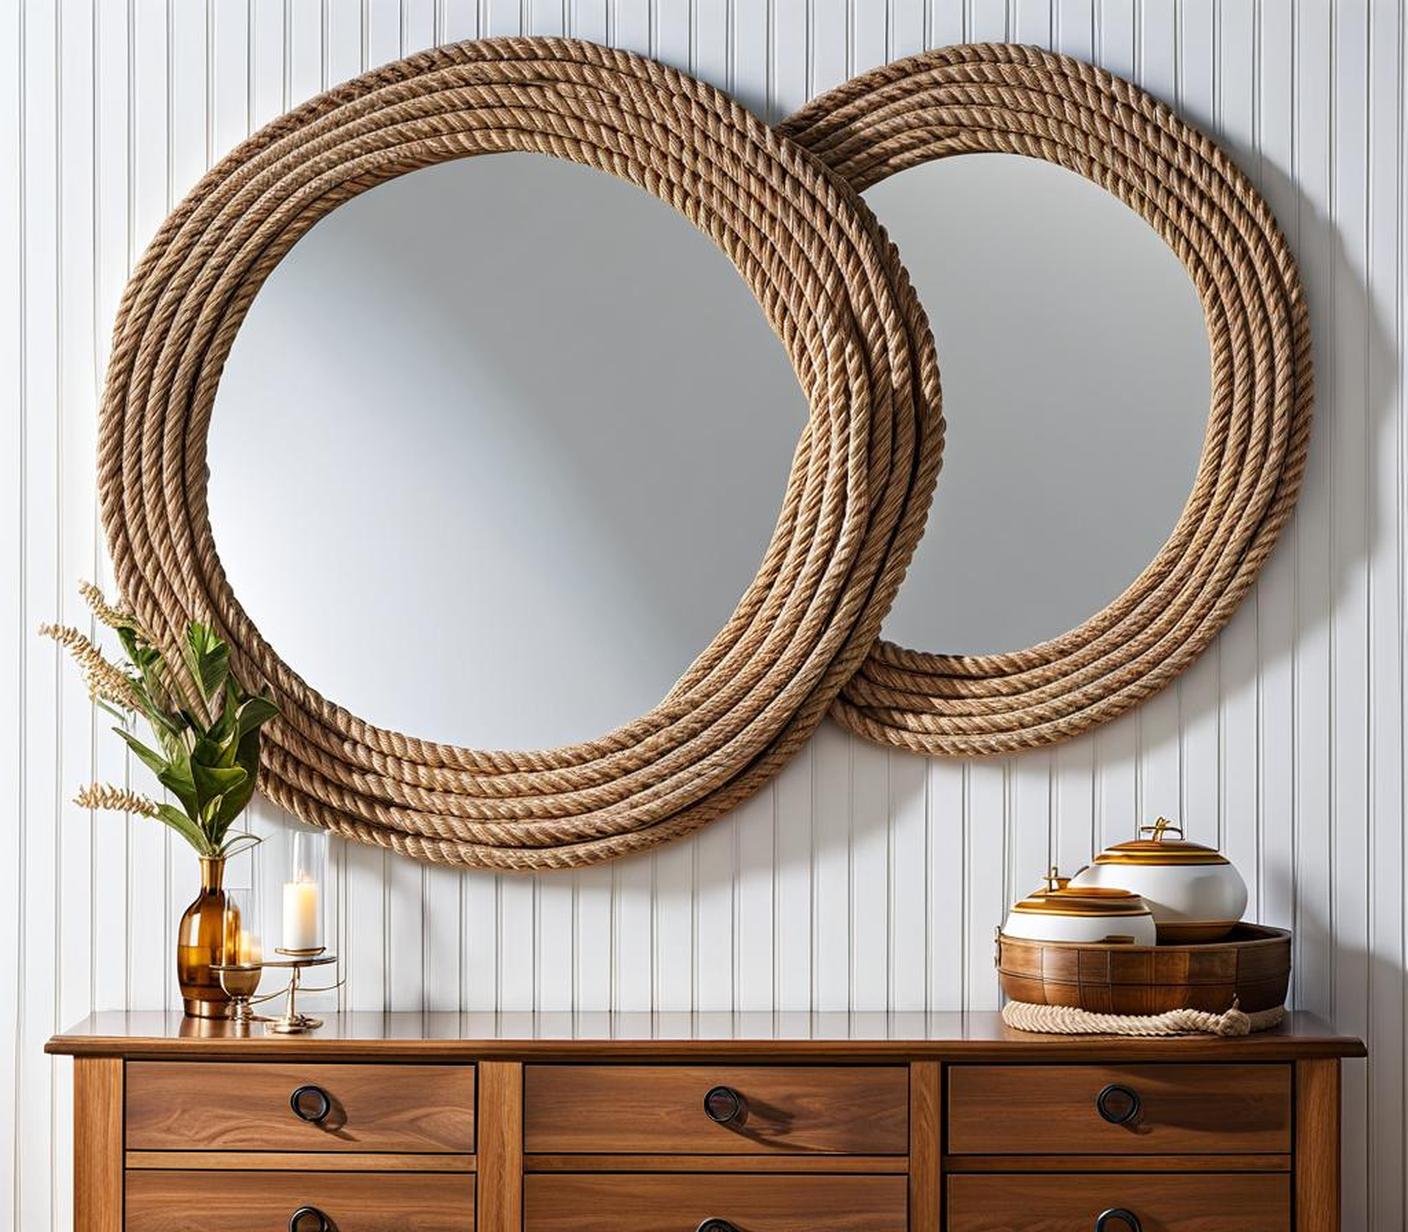 All Hands on Deck! Make Your Own Nautical Rope Mirrors